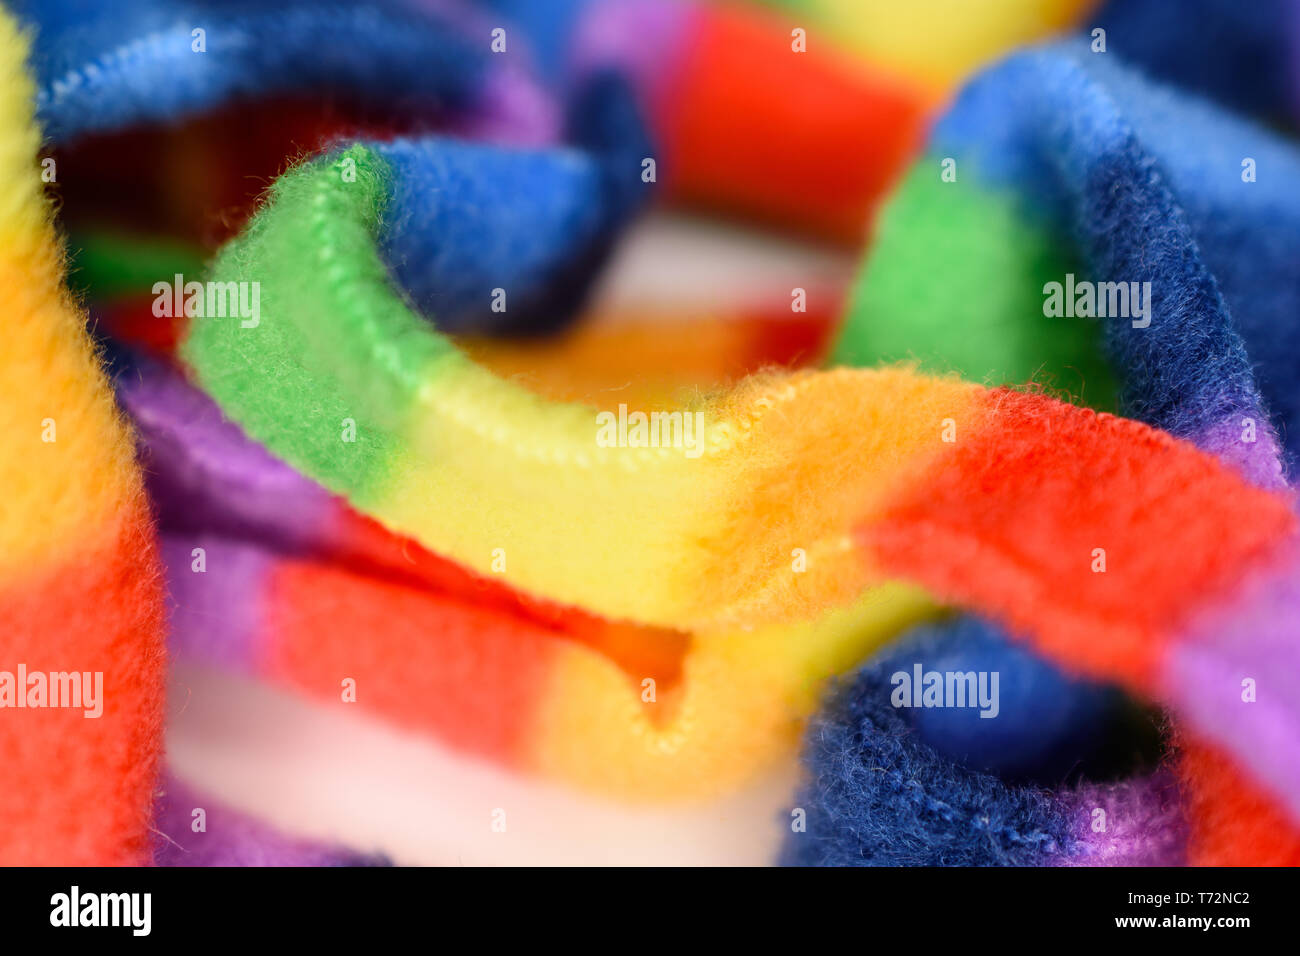 Closeup (Macro) View of Bright and Colorful  Soft and Fuzzy Rainbow Yarn Stock Photo